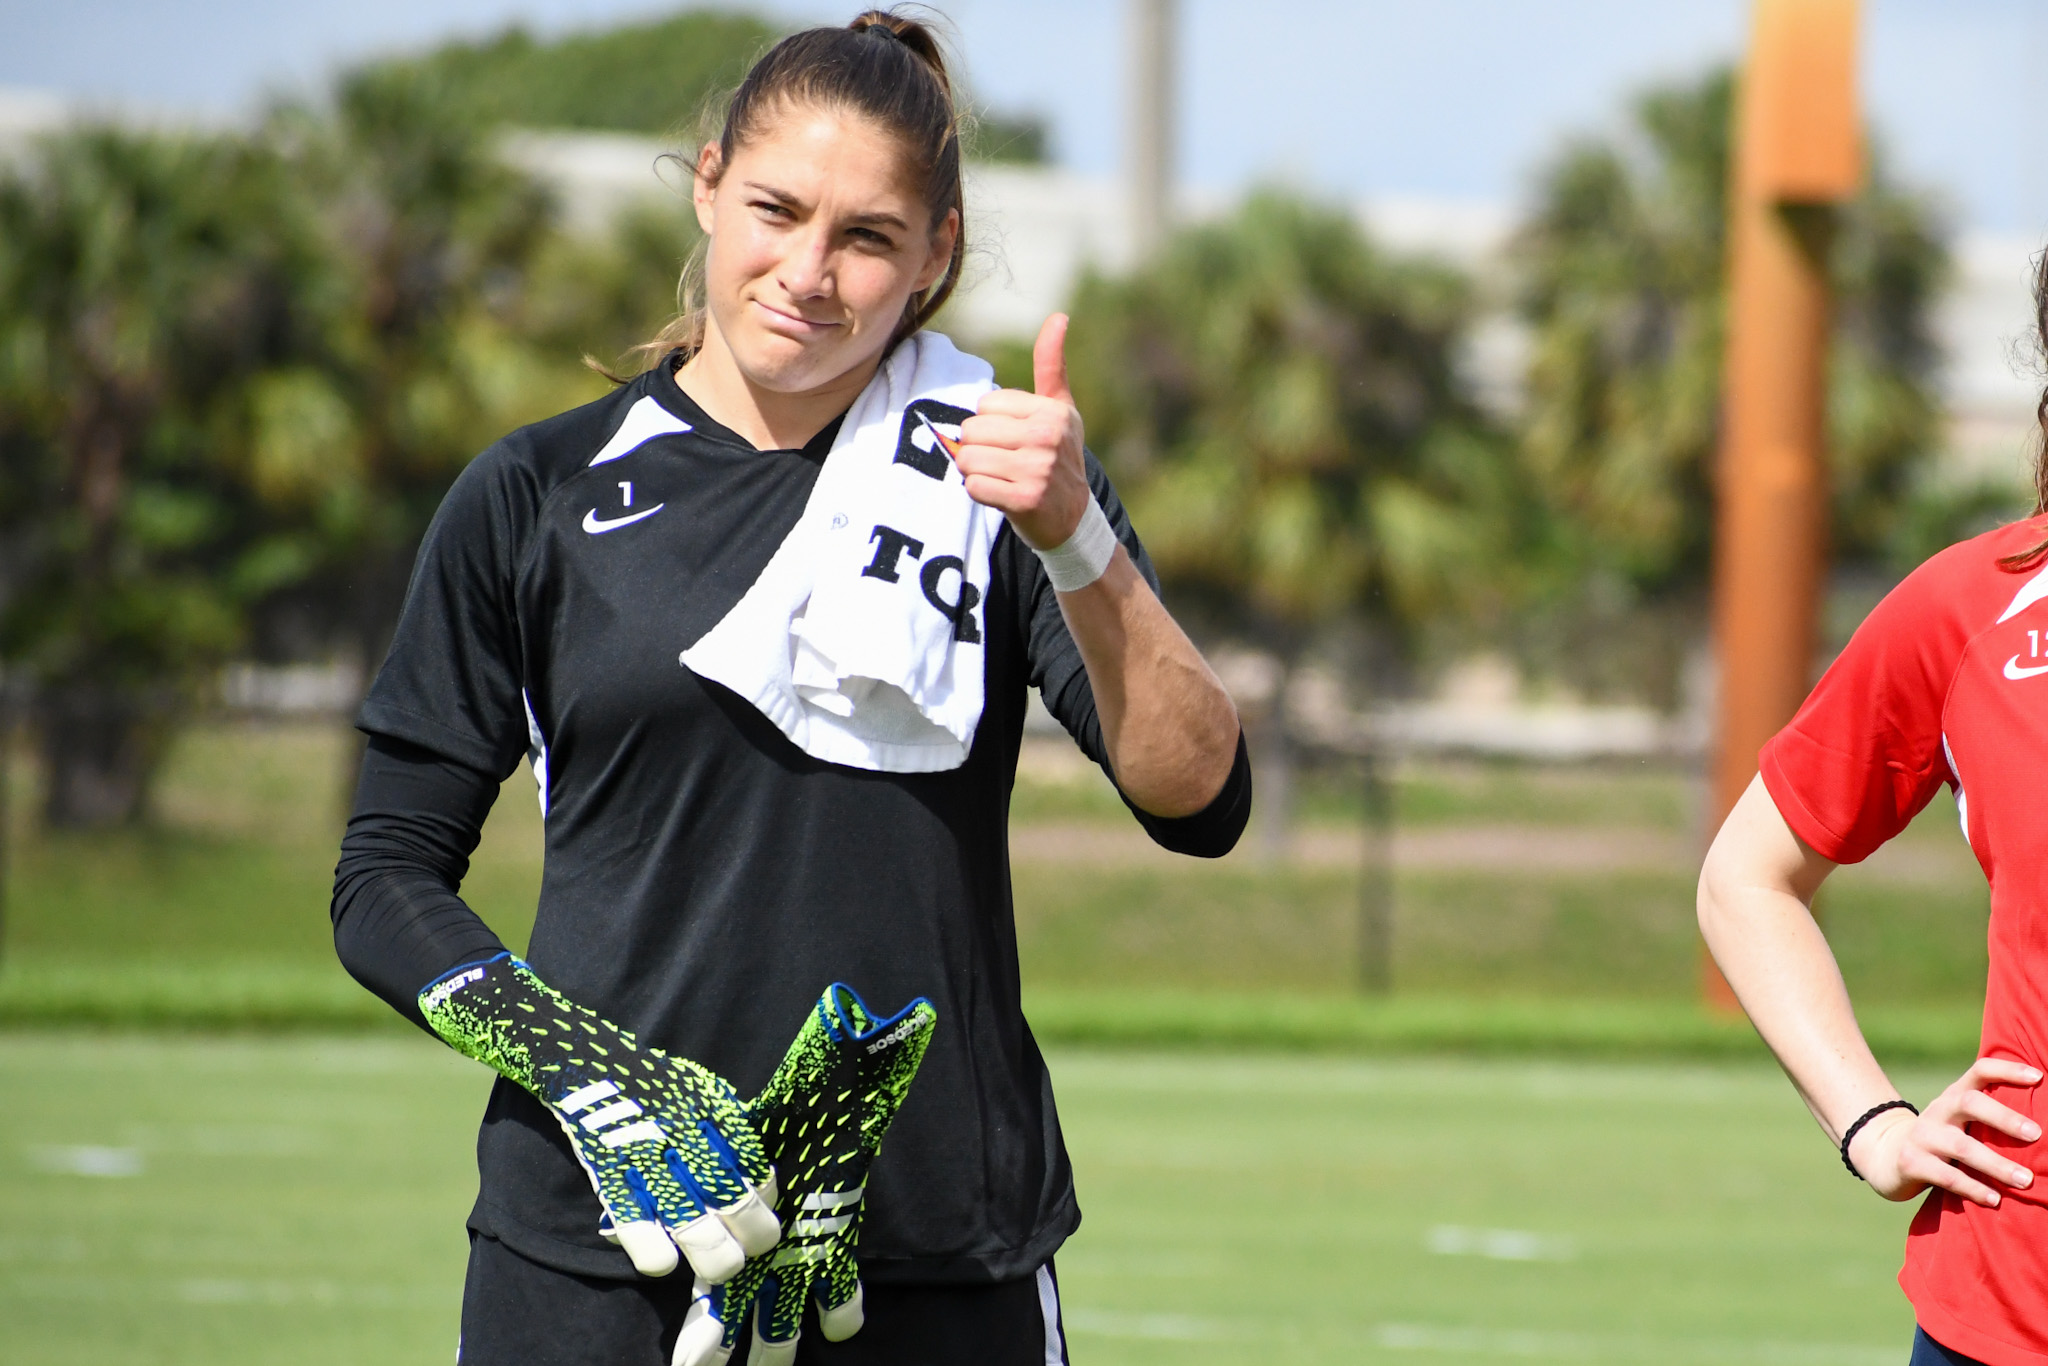 The Washington Spirit to Train in The Palm Beaches, Florida from March 1 through March 21 Featured Image